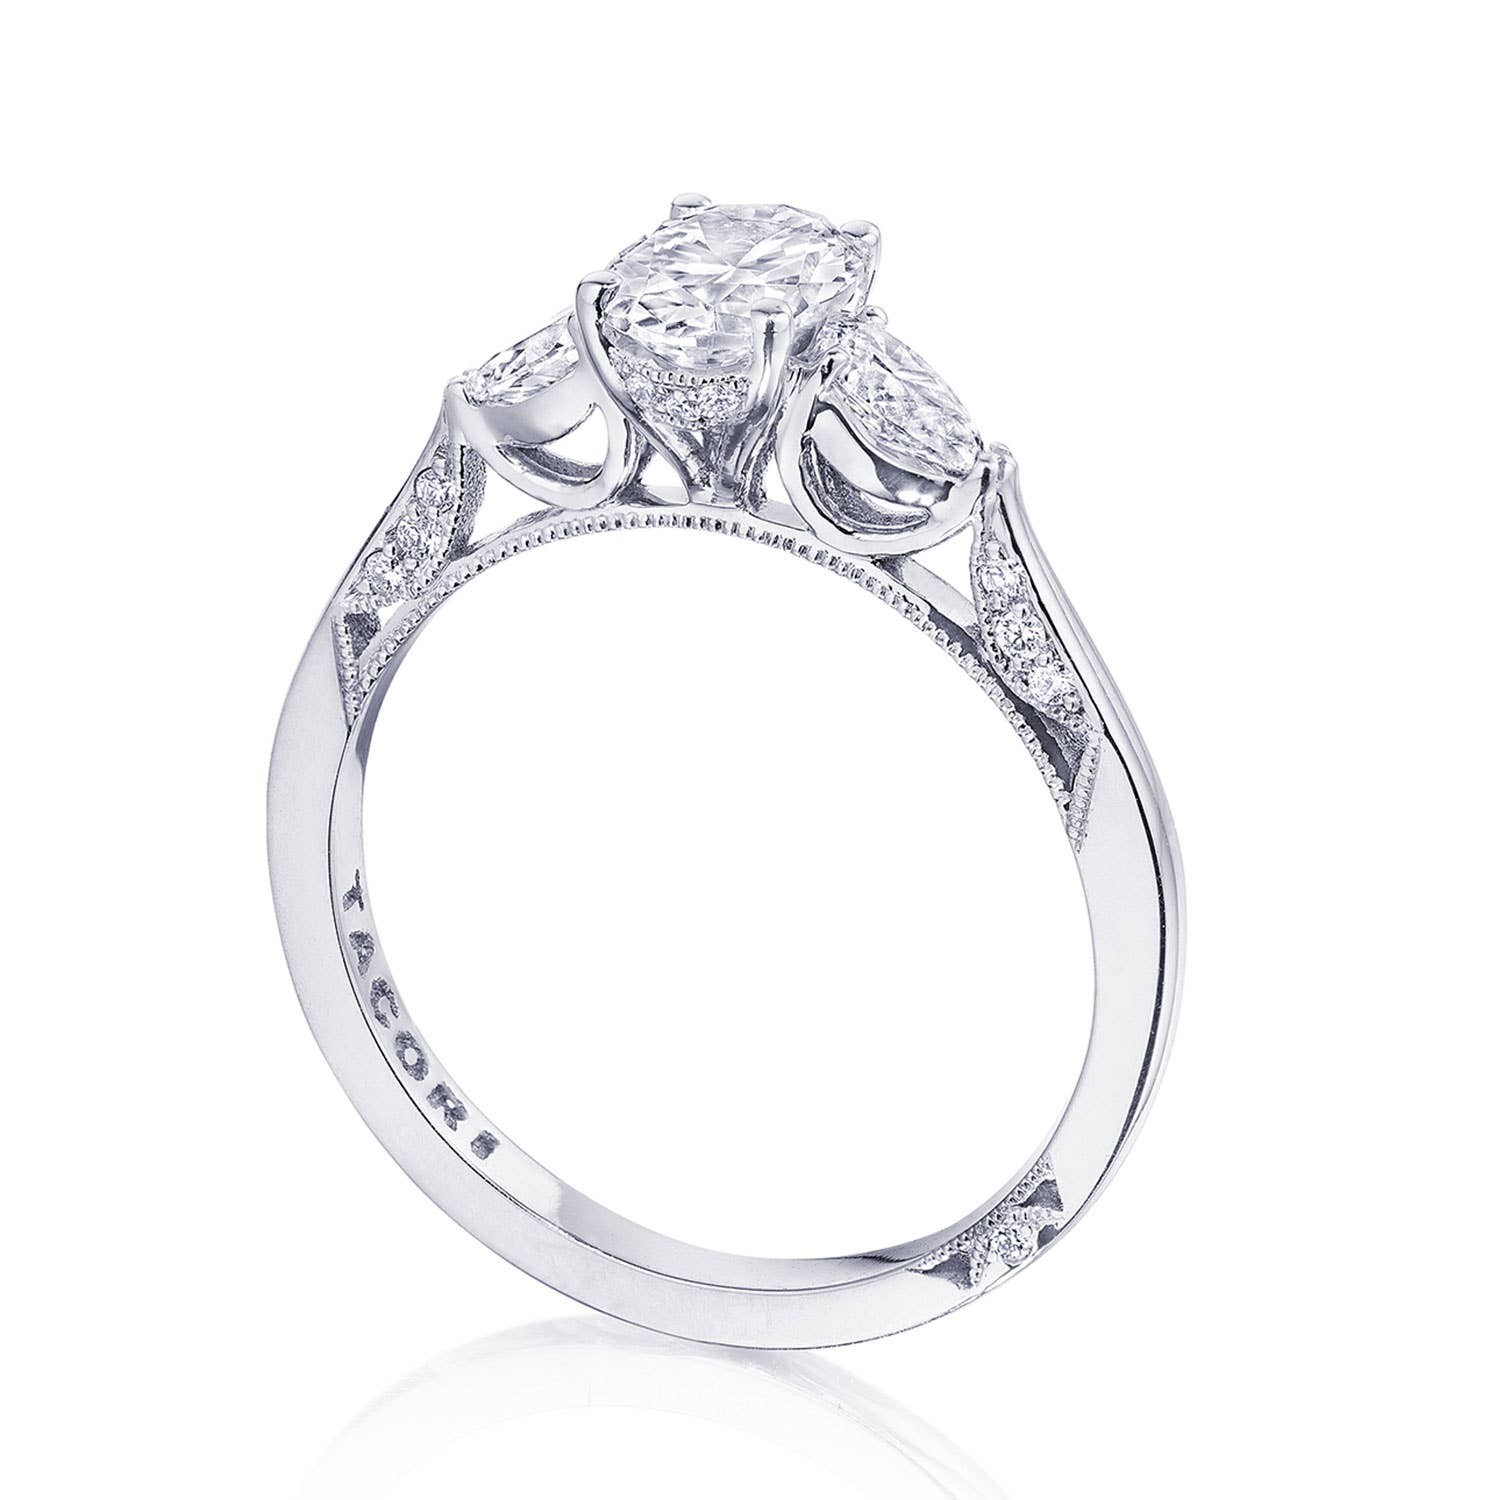 Tacori 18 Karat White Gold Semi-Mount Ring With .37Tw Pear Diamonds
*Setting only, center stone not included